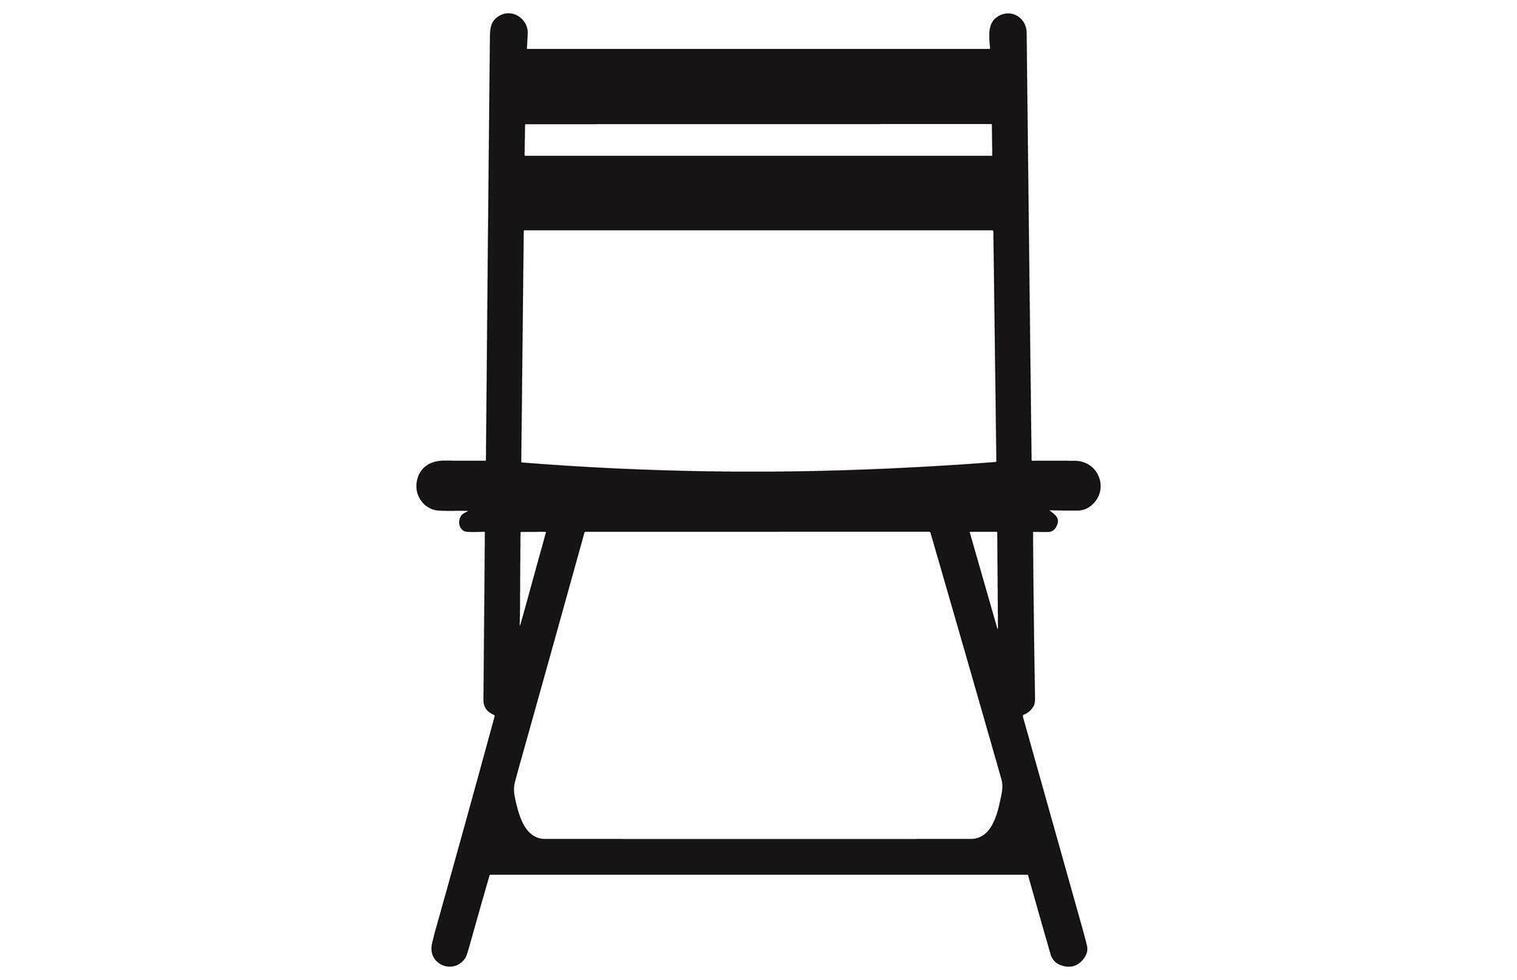 Folding Chair silhouette,Folding chair vector illustration.Chairs Vector Silhouette